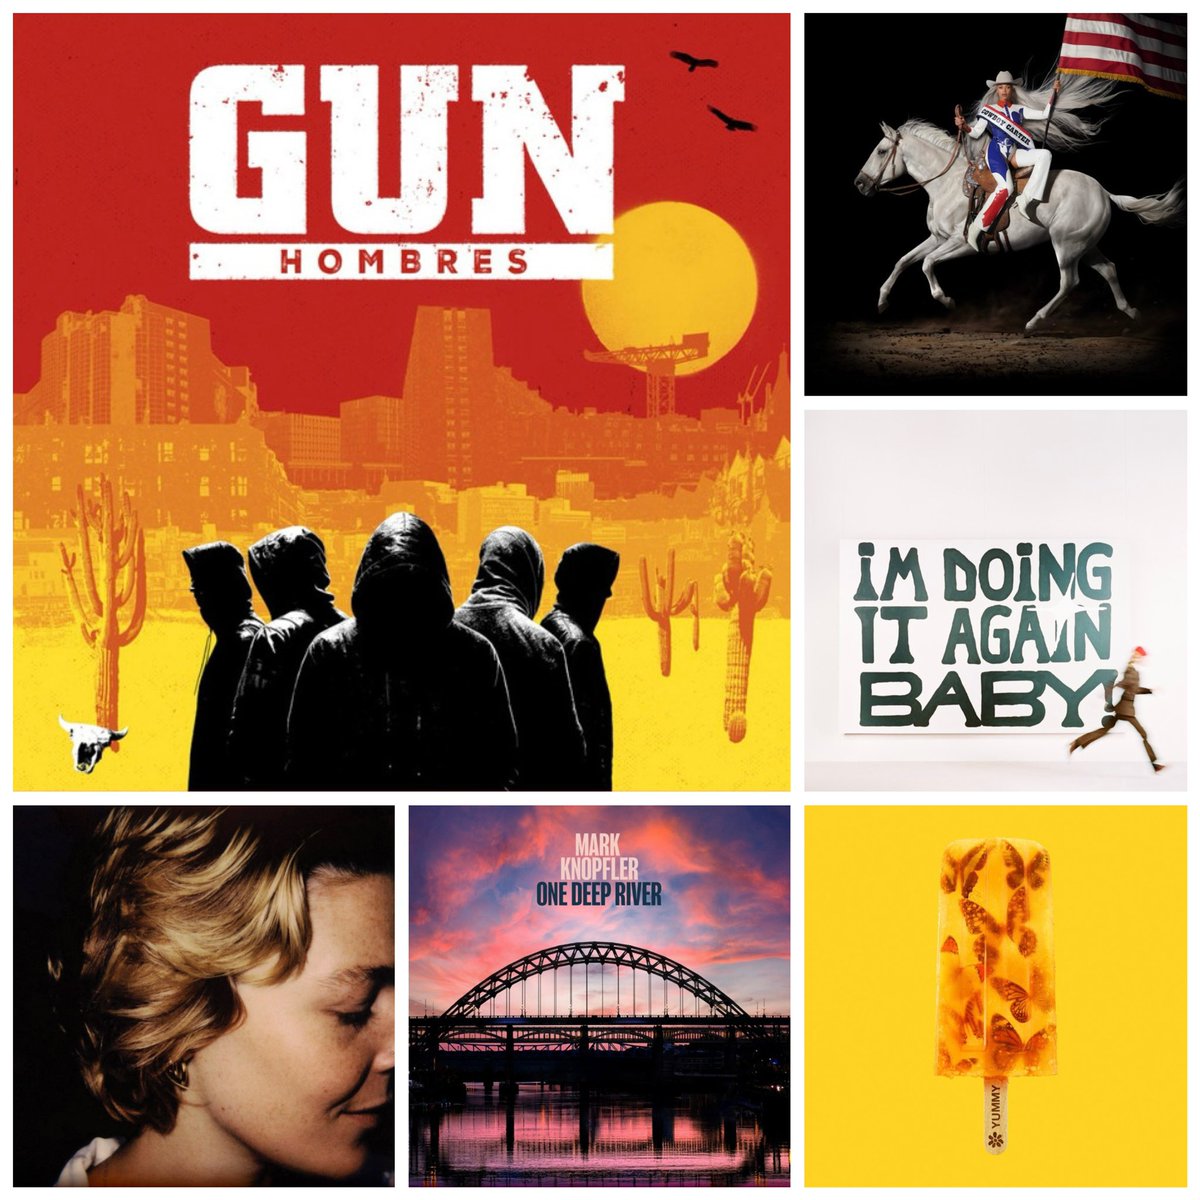 New releases this week from: @gunofficialuk @Beyonce #GirlInRed @maggierogers @MarkKnopfler @wearejames & more! #NewMusicFriday #playlist #NMF